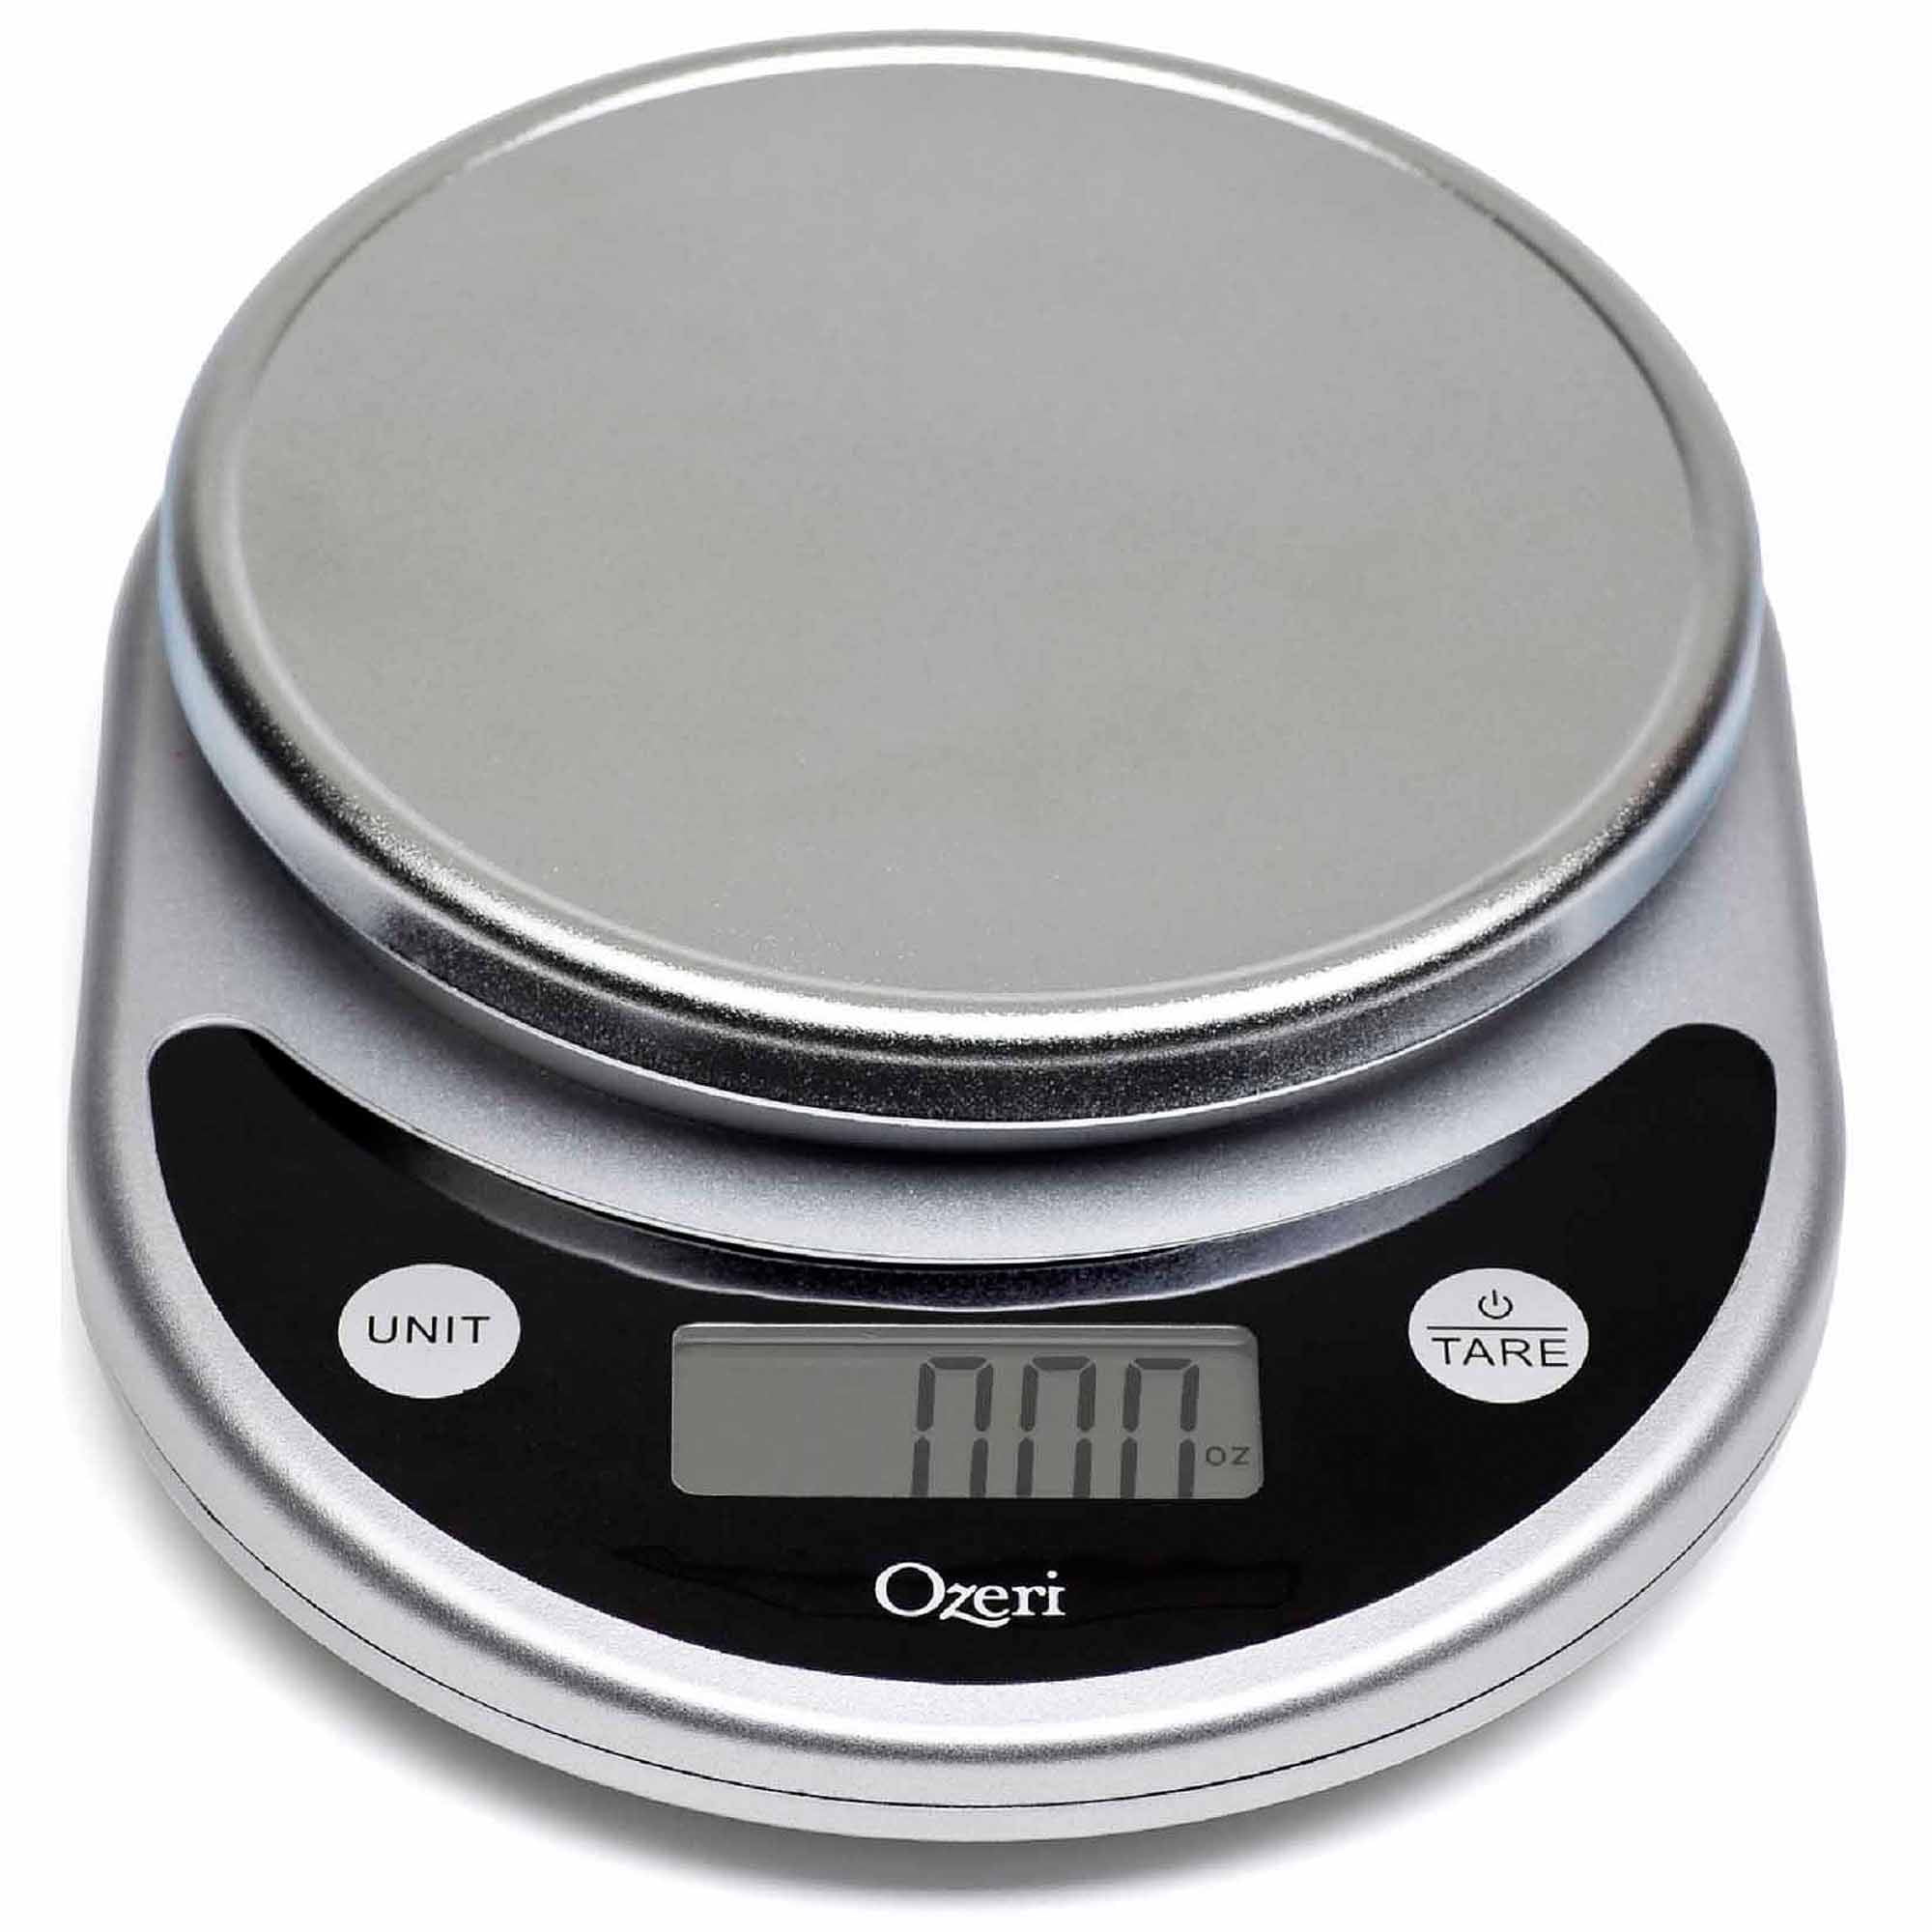  Ozeri ZK24 Garden and Kitchen Scale, with 0.5 g (0.01 oz)  Precision Weighing Technology, in Black : Kitchen & Dining